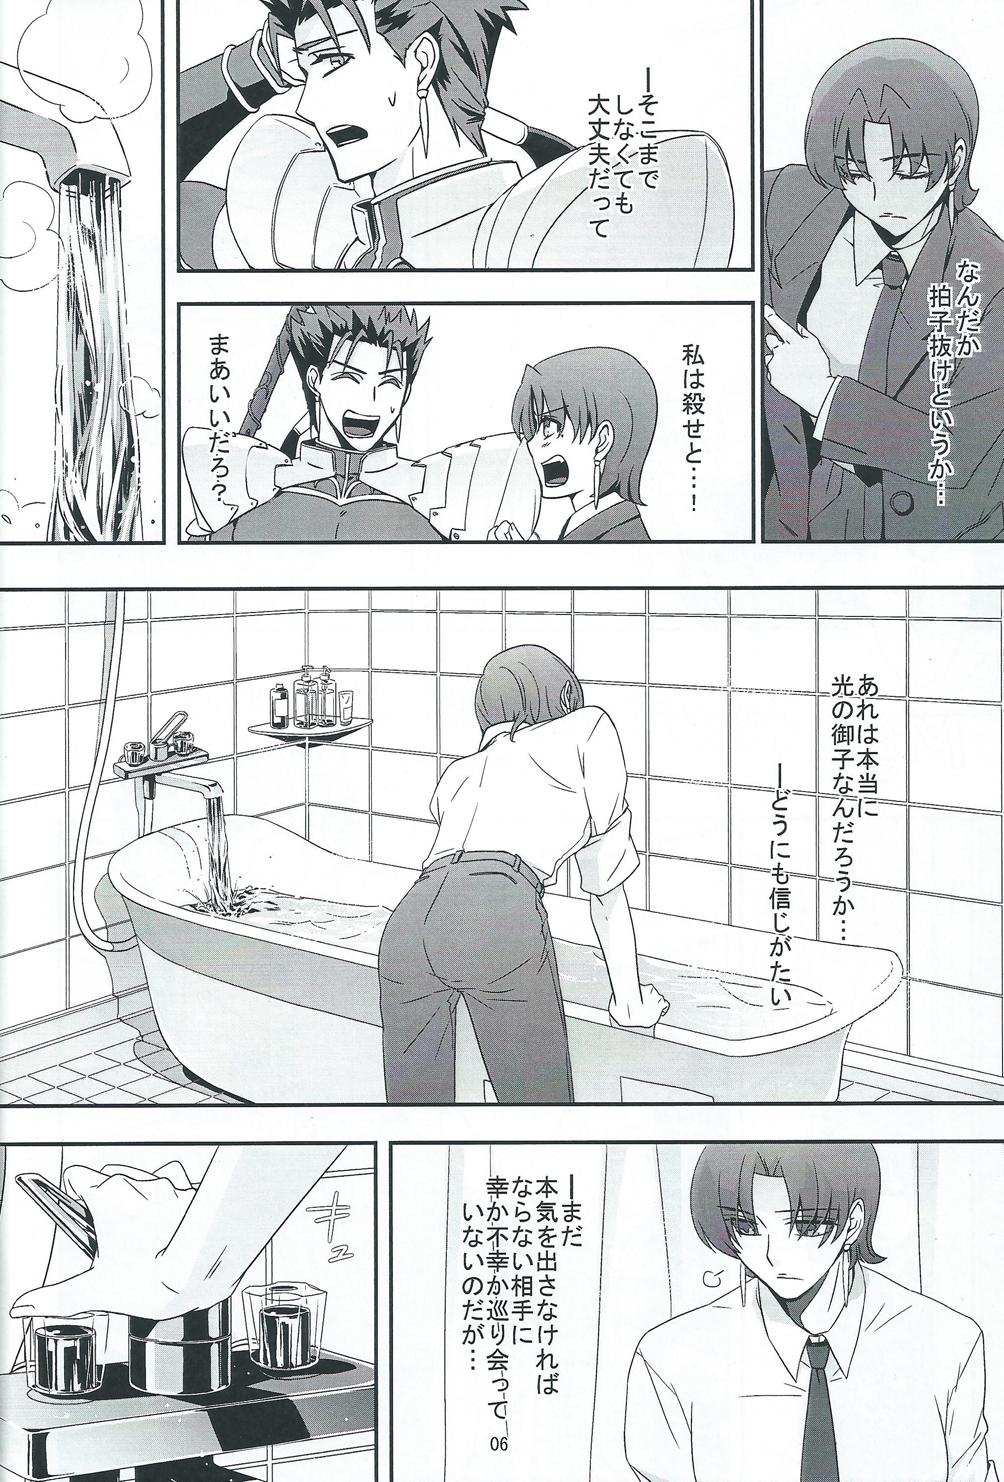 Punishment My Heart Goes Bang - Fate hollow ataraxia Blowjob Porn - Page 5